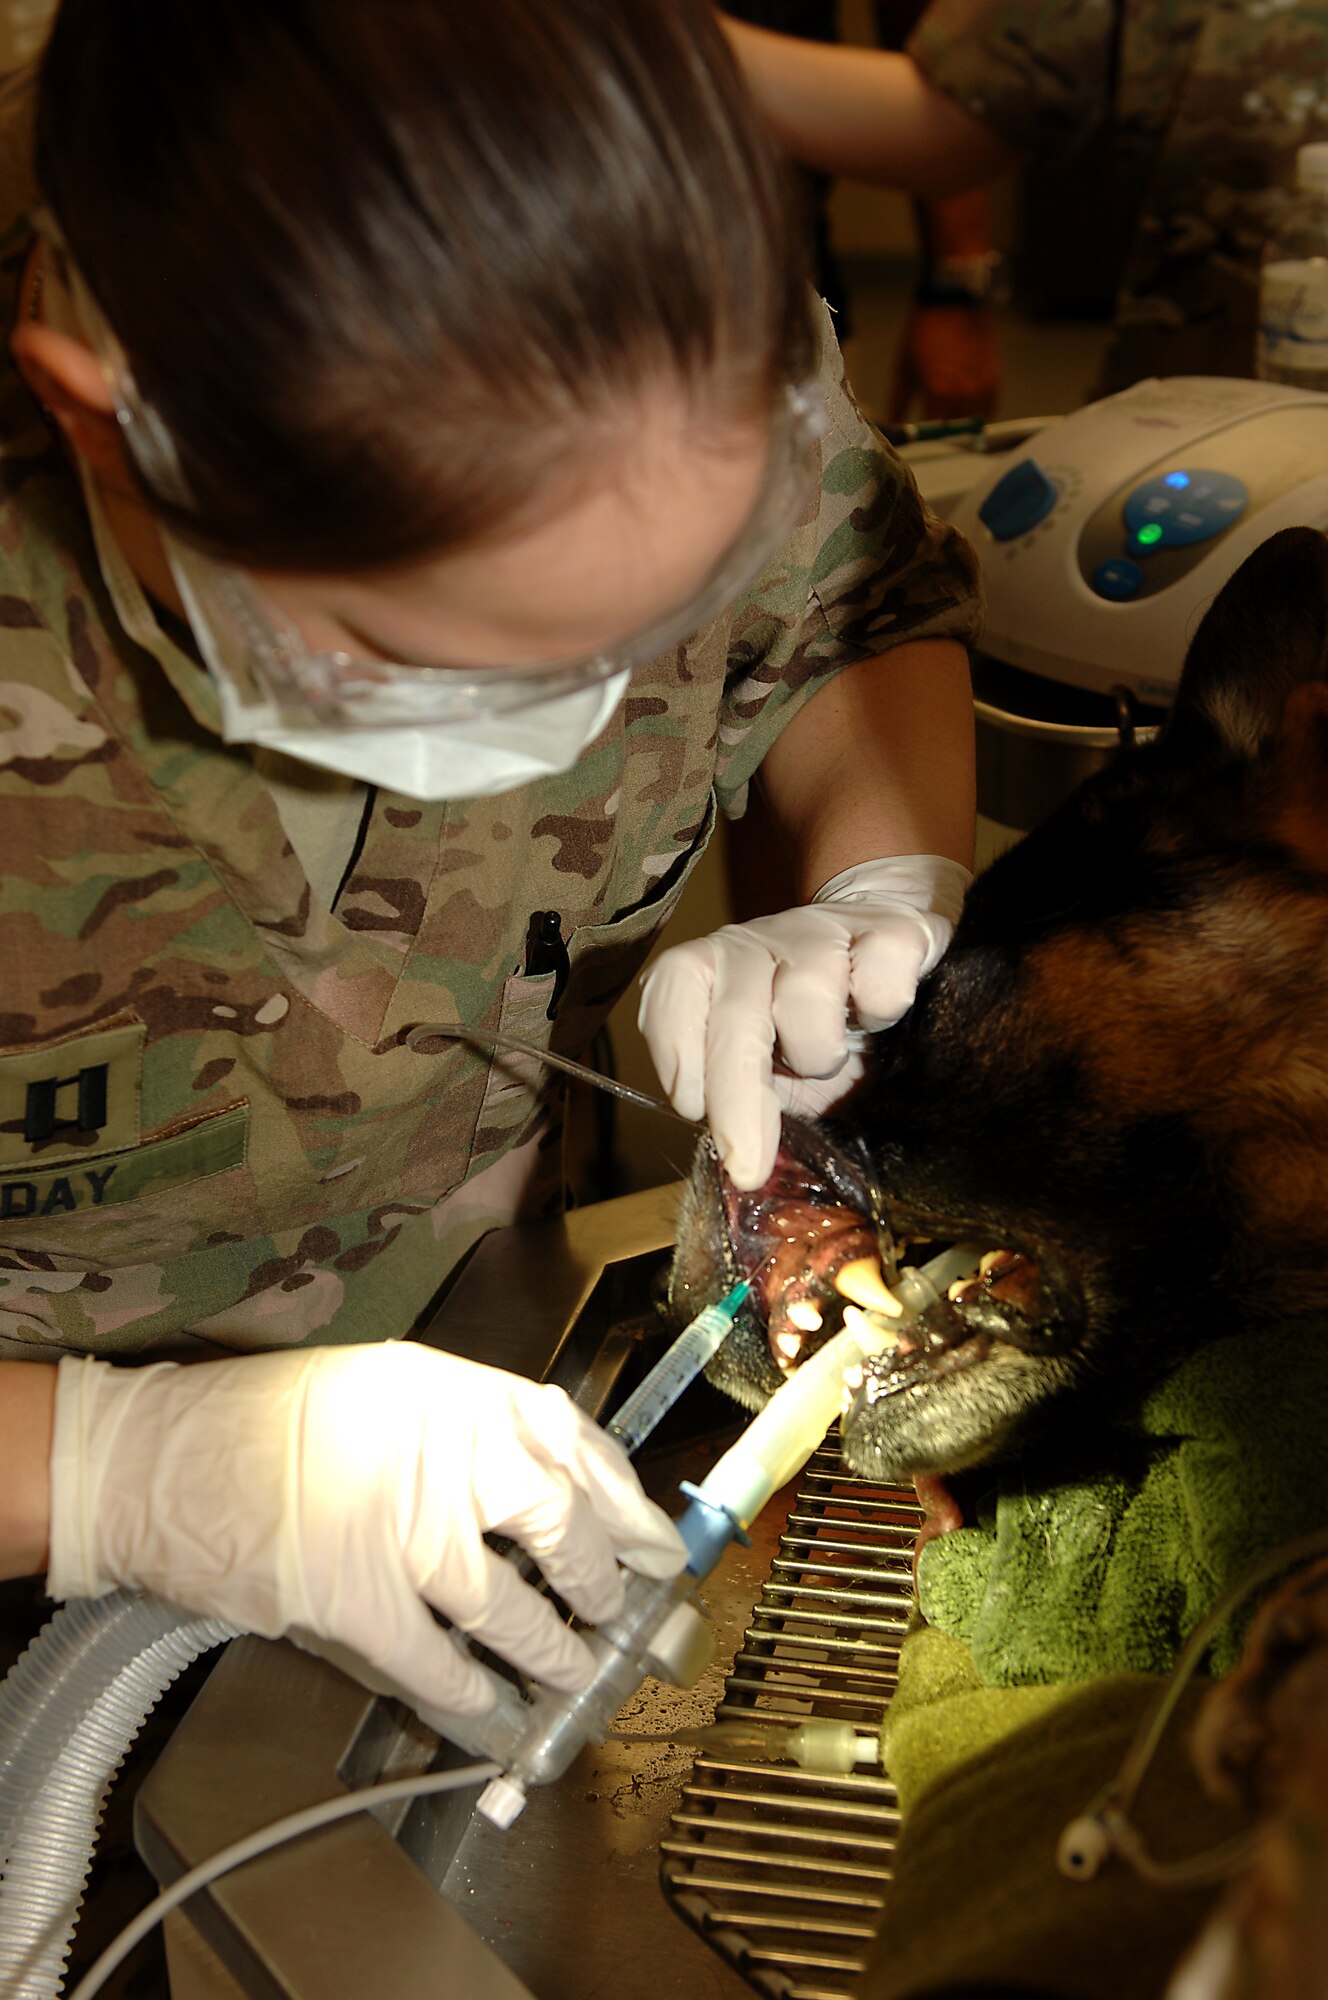 U.S. Army Capt. Lindsey Day, Kandahar Veterinary Treatment Facility veterinary services support team officer in charge, gives a local anesthetic agent before removing a tooth from Contract Working Dog Tommi Nov. 20, 2013, at Kandahar Airfield, Afghanistan. CWD Tommi’s visit was for a routine dental cleaning. (U.S. Air Force photo by Senior Airman Jack Sanders)